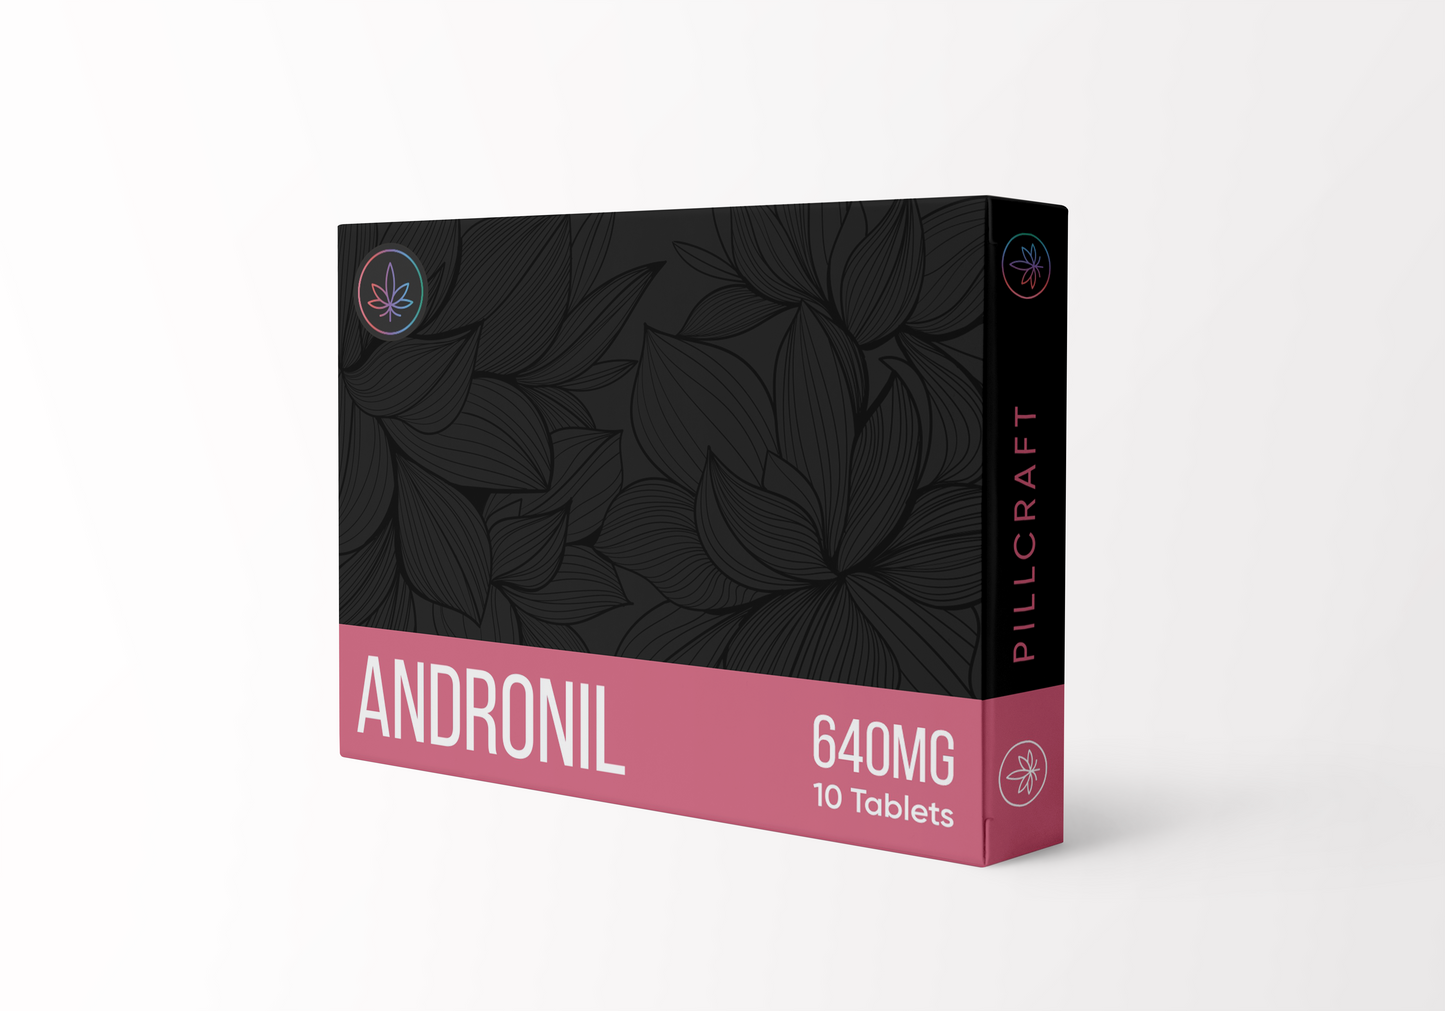 Andronil for women's wellness, pcod, pcos, menstrual cramps, period pain, pimples. CBD Based herbal medicines in india